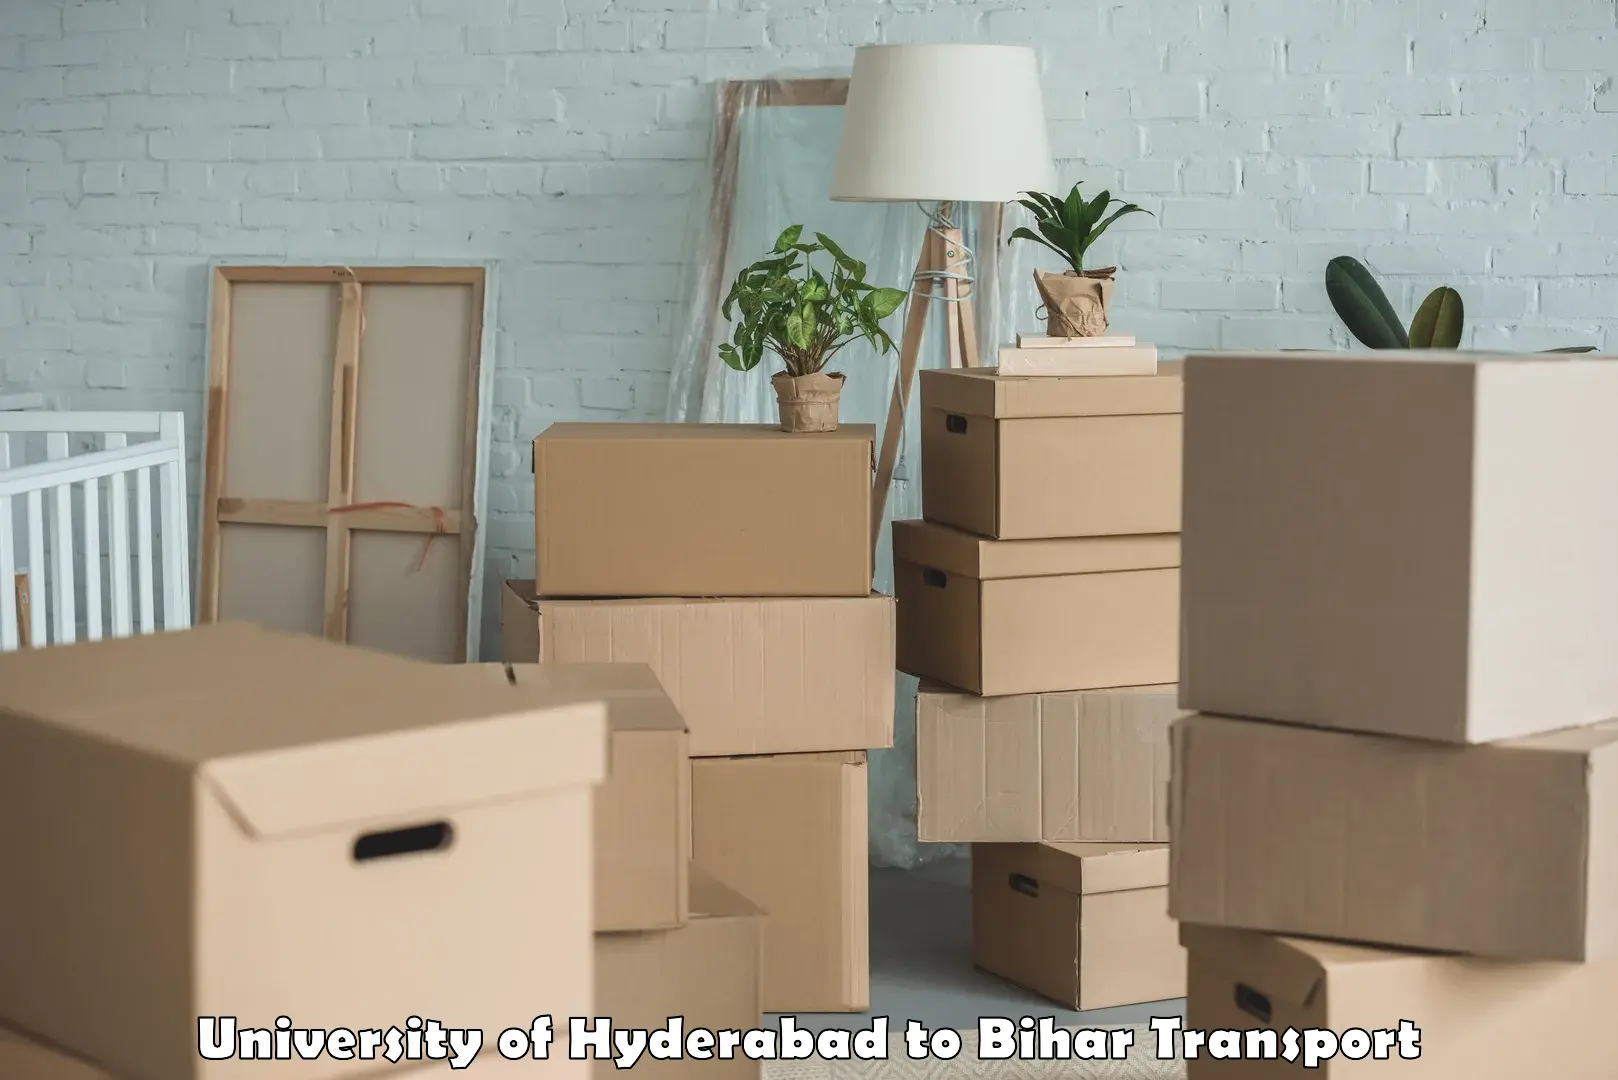 Transport shared services University of Hyderabad to Chakia